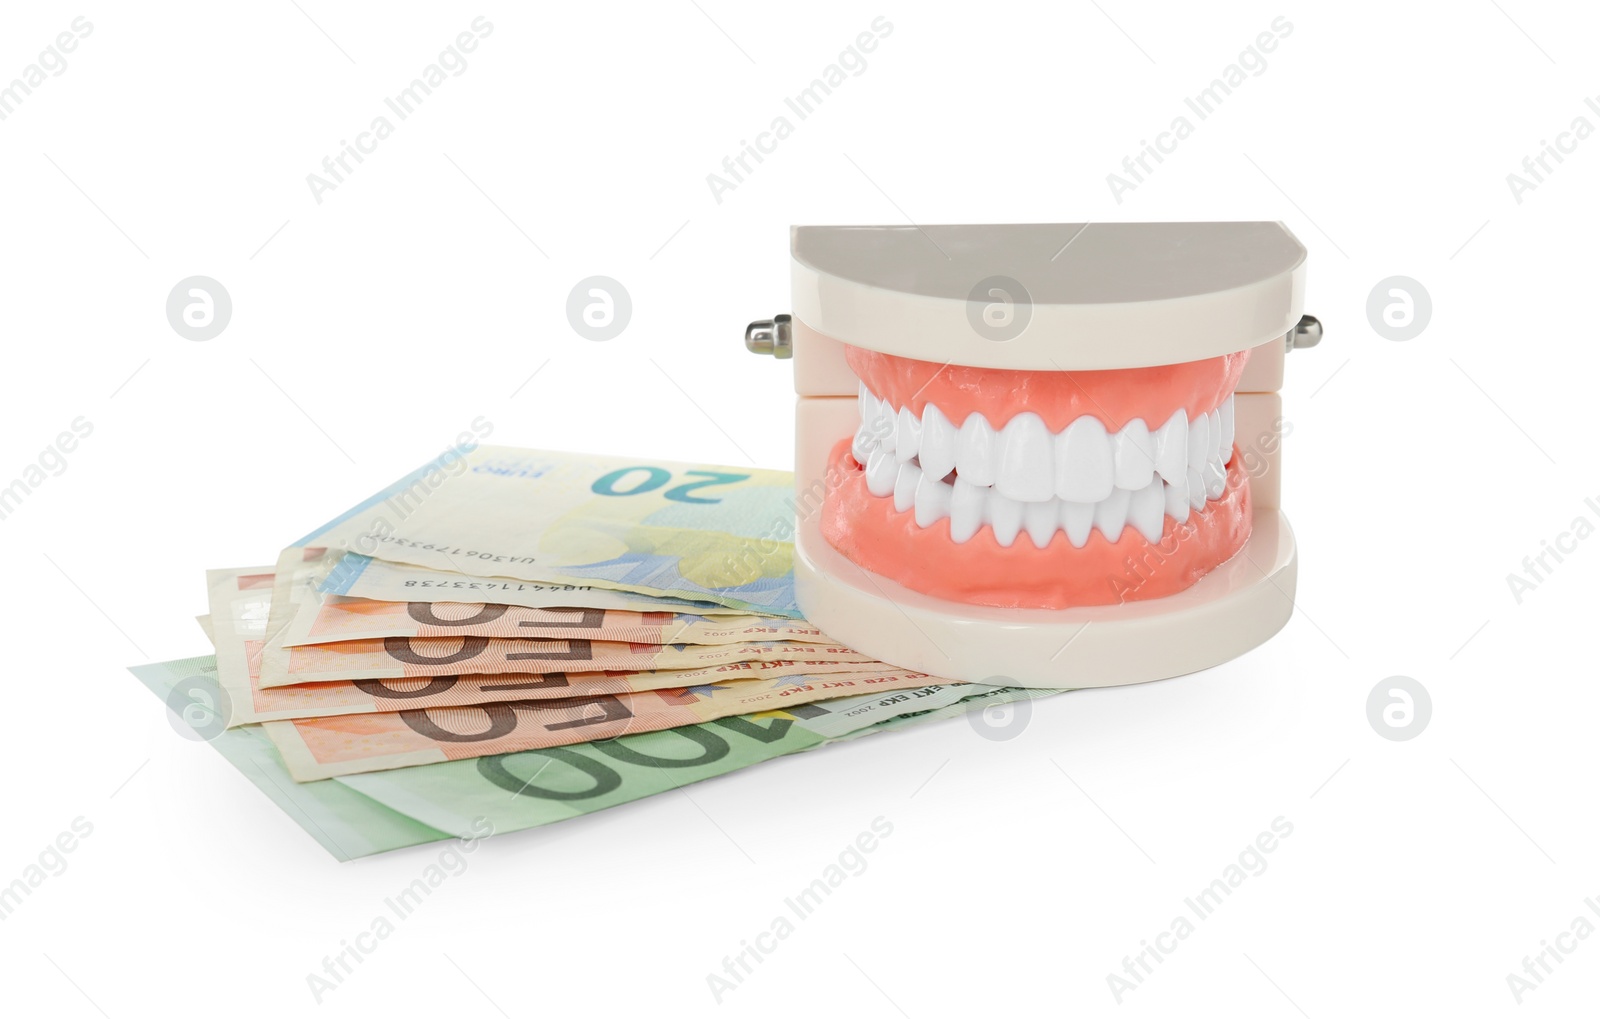 Photo of Educational dental typodont model and euro banknotes on white background. Expensive treatment